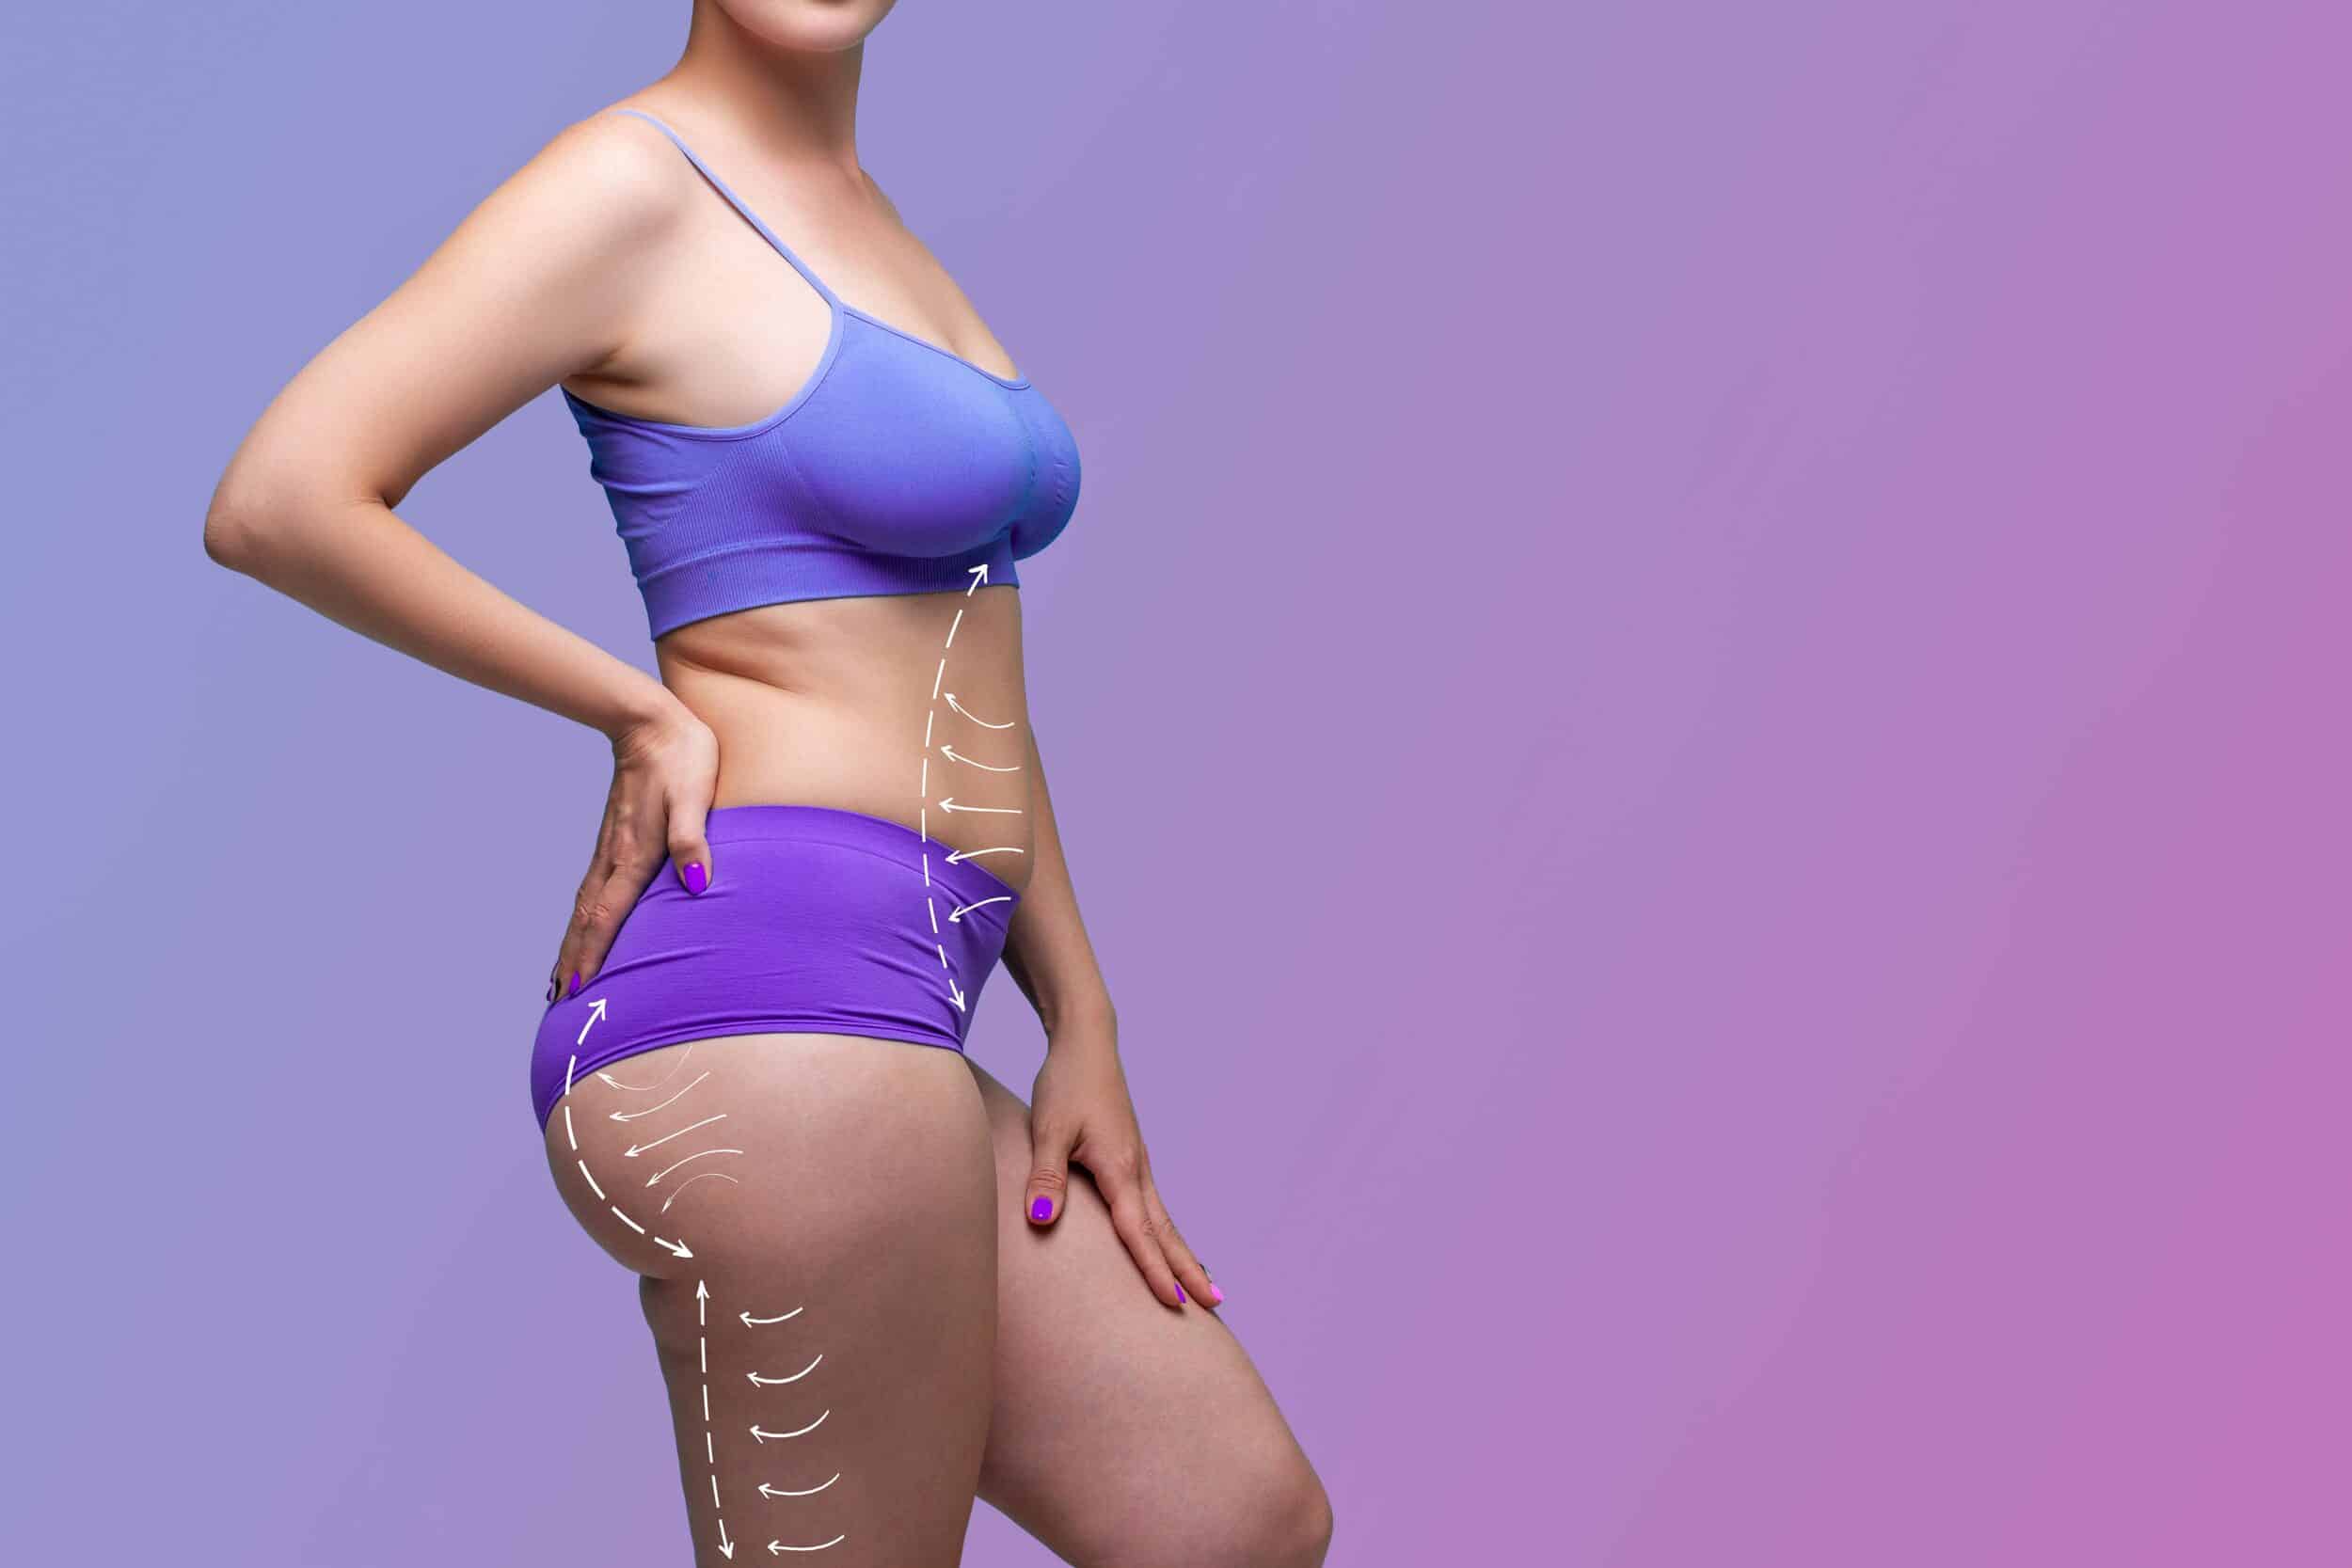 Body Shaping Vs Body Slimming: Are They The Same?